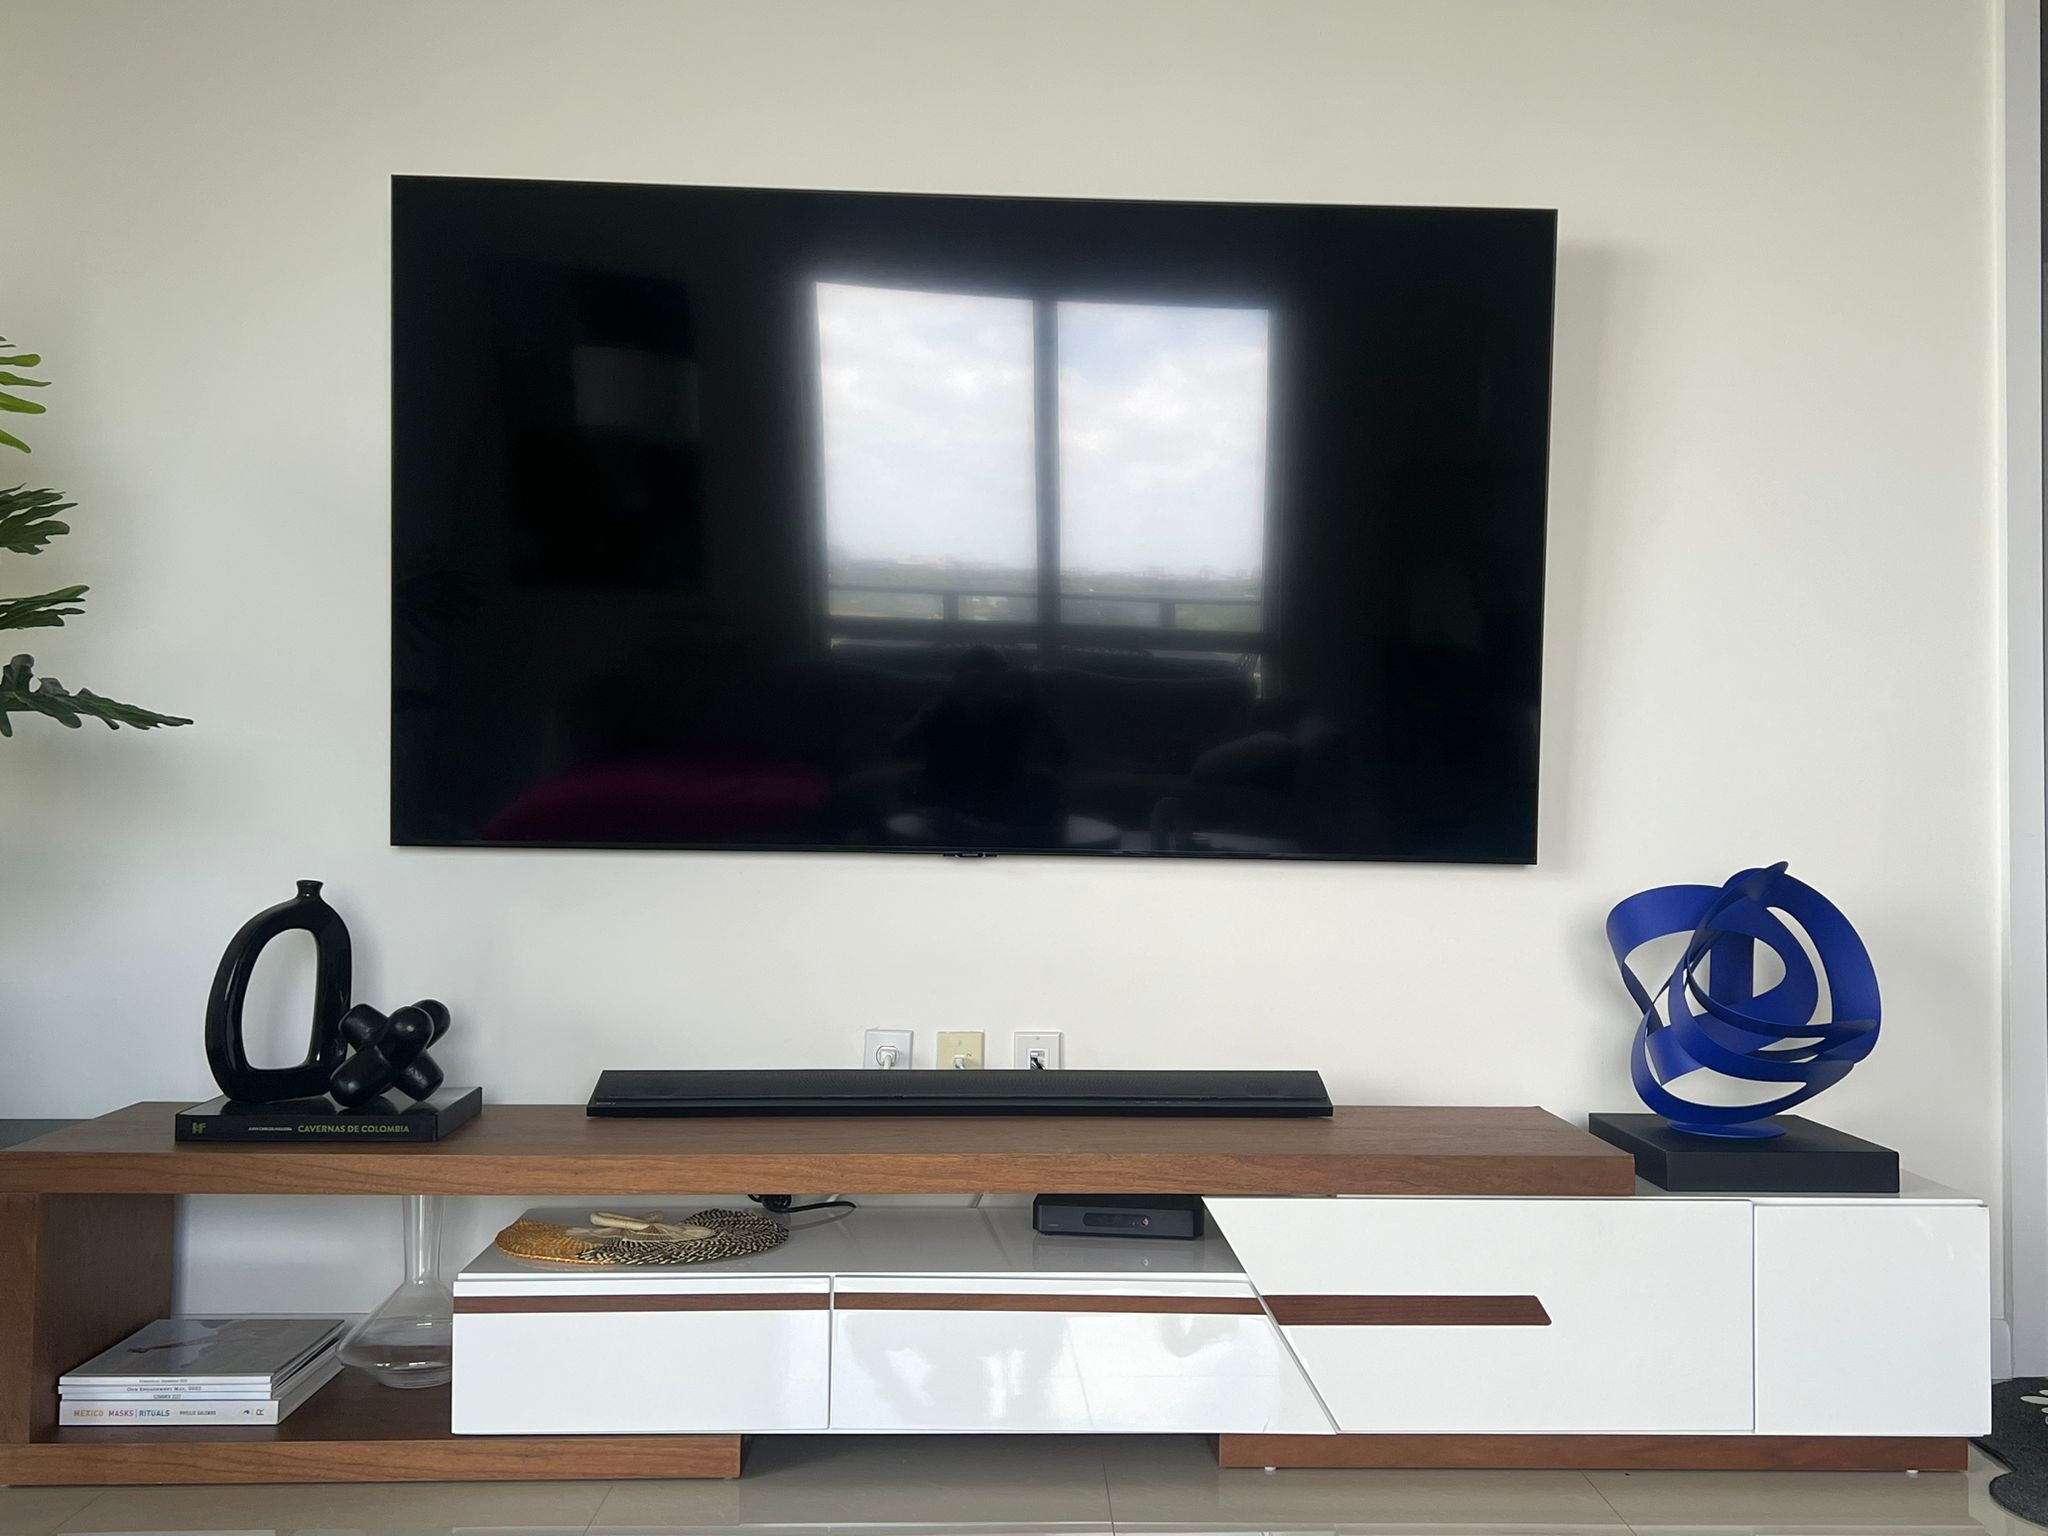 TV STAND - WOOD - EXPANDABLE